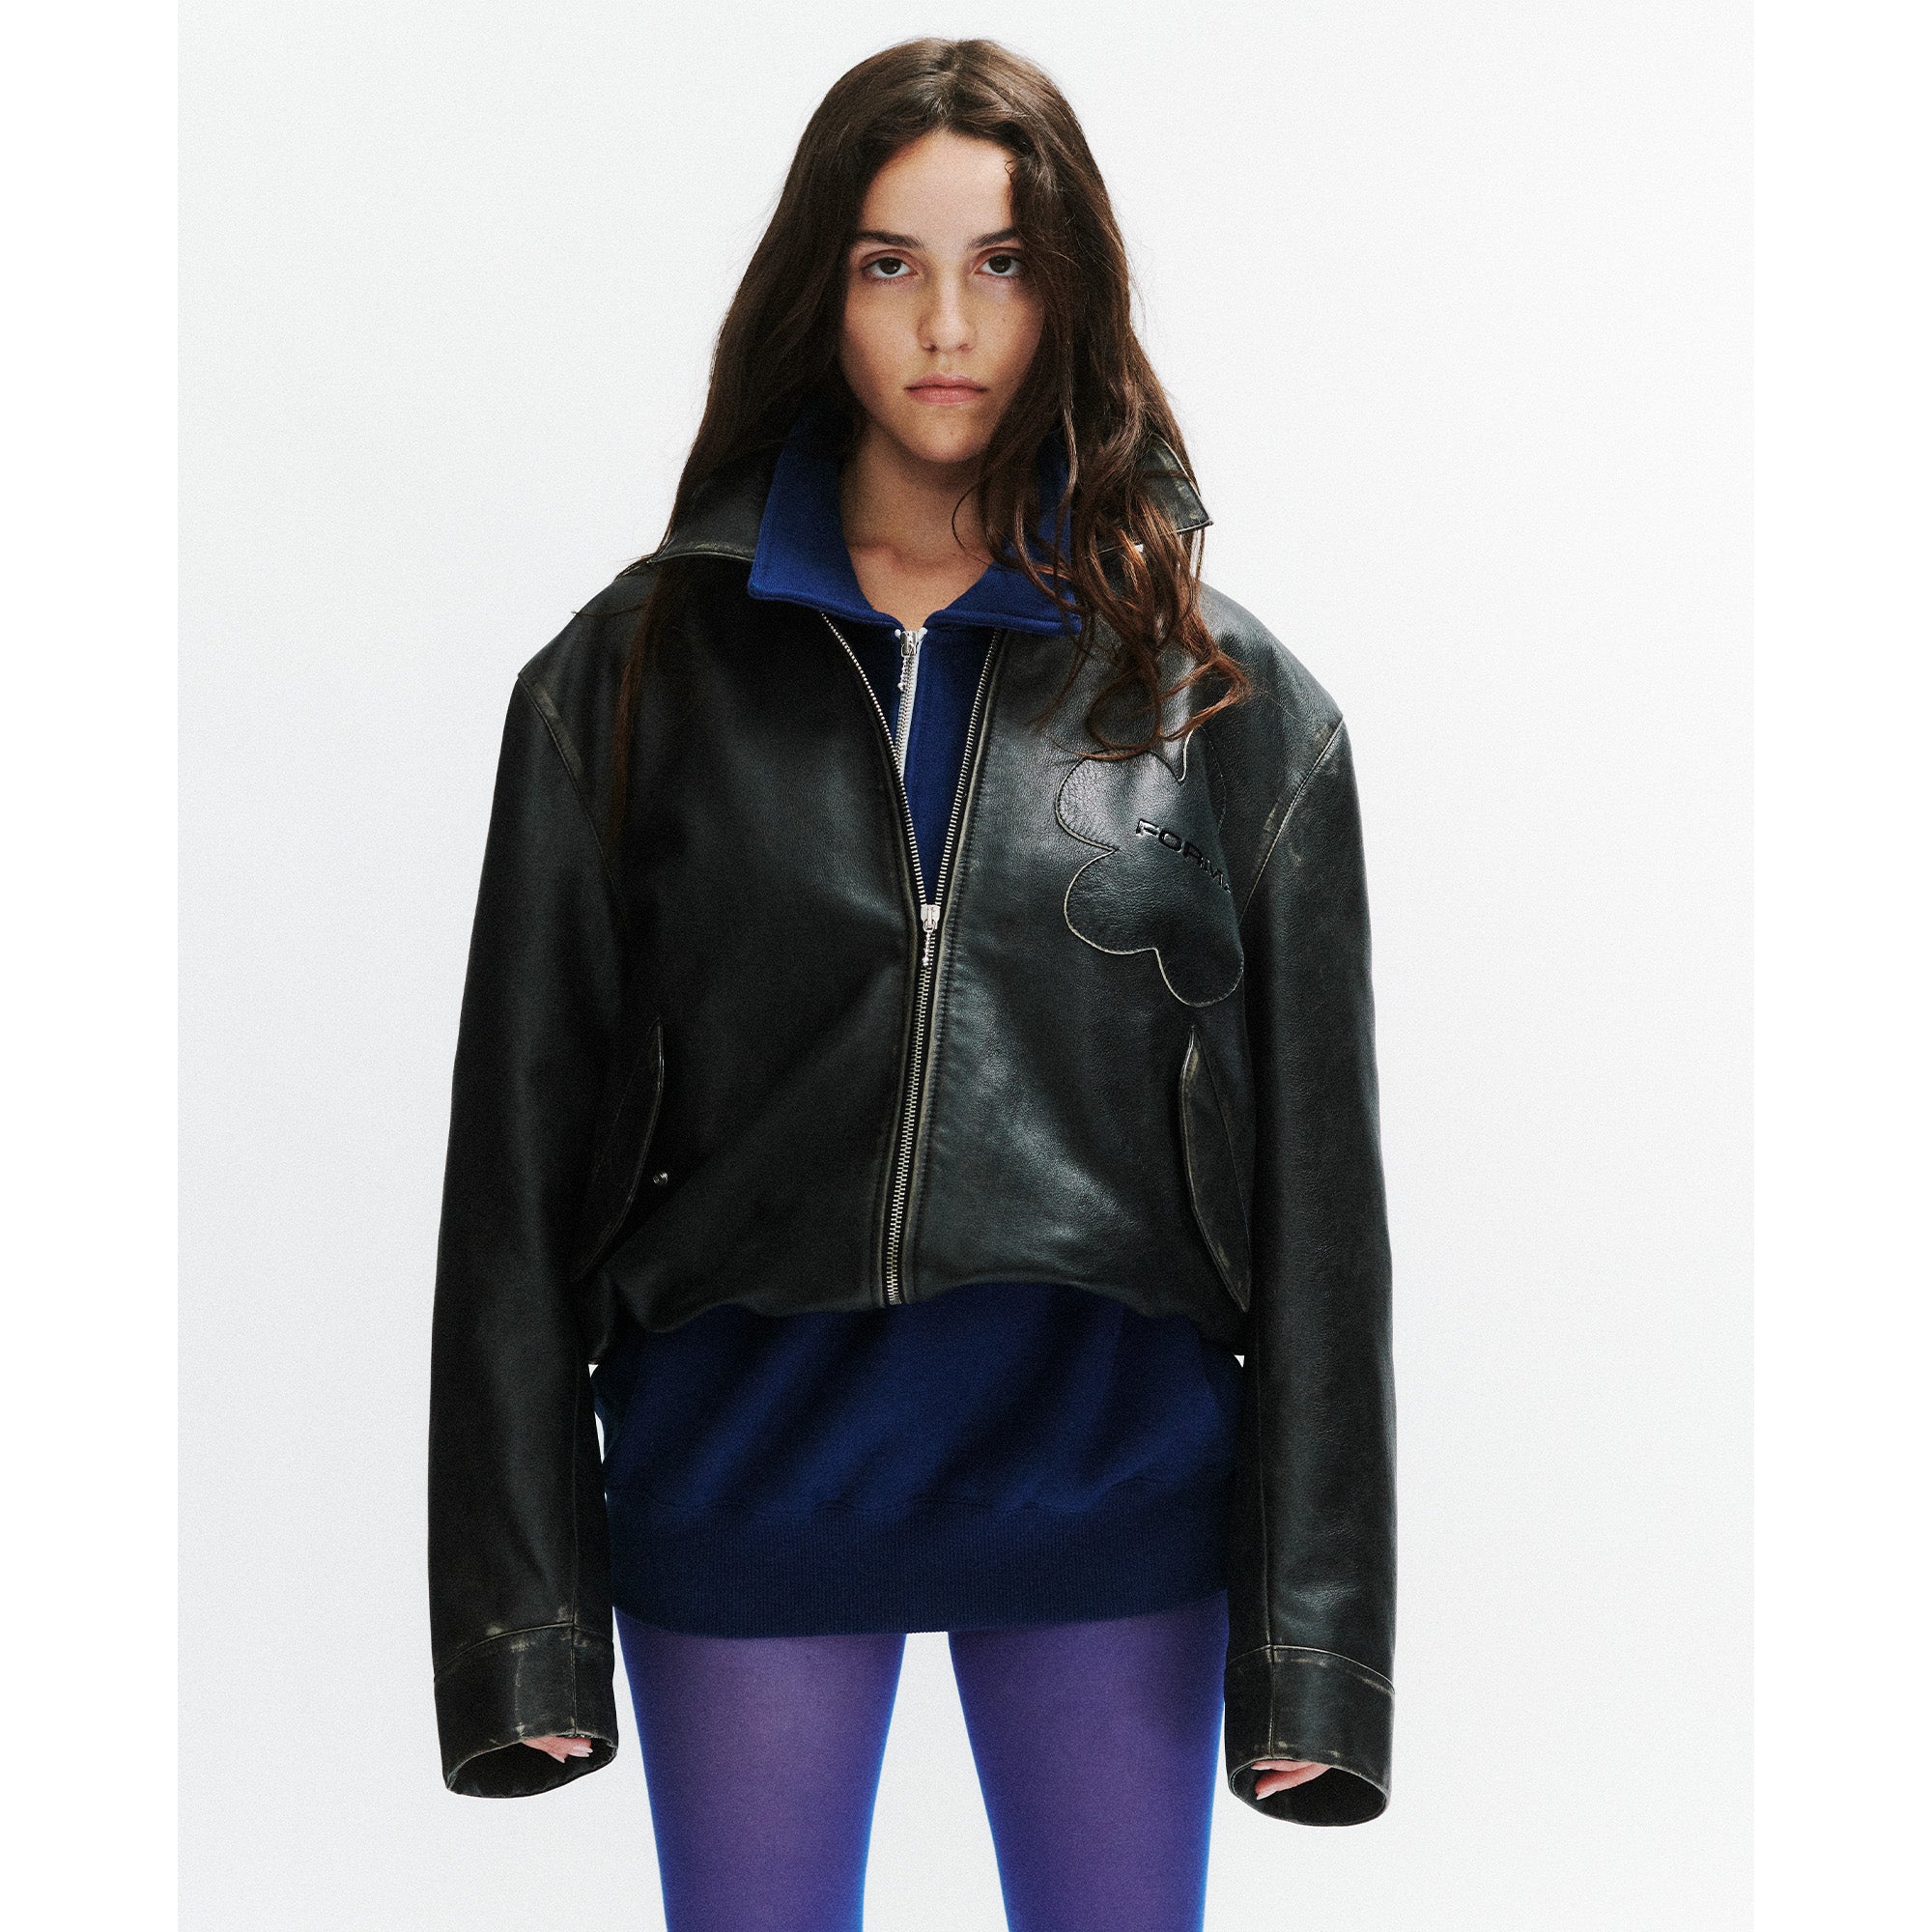 Forma Flower leather bomber